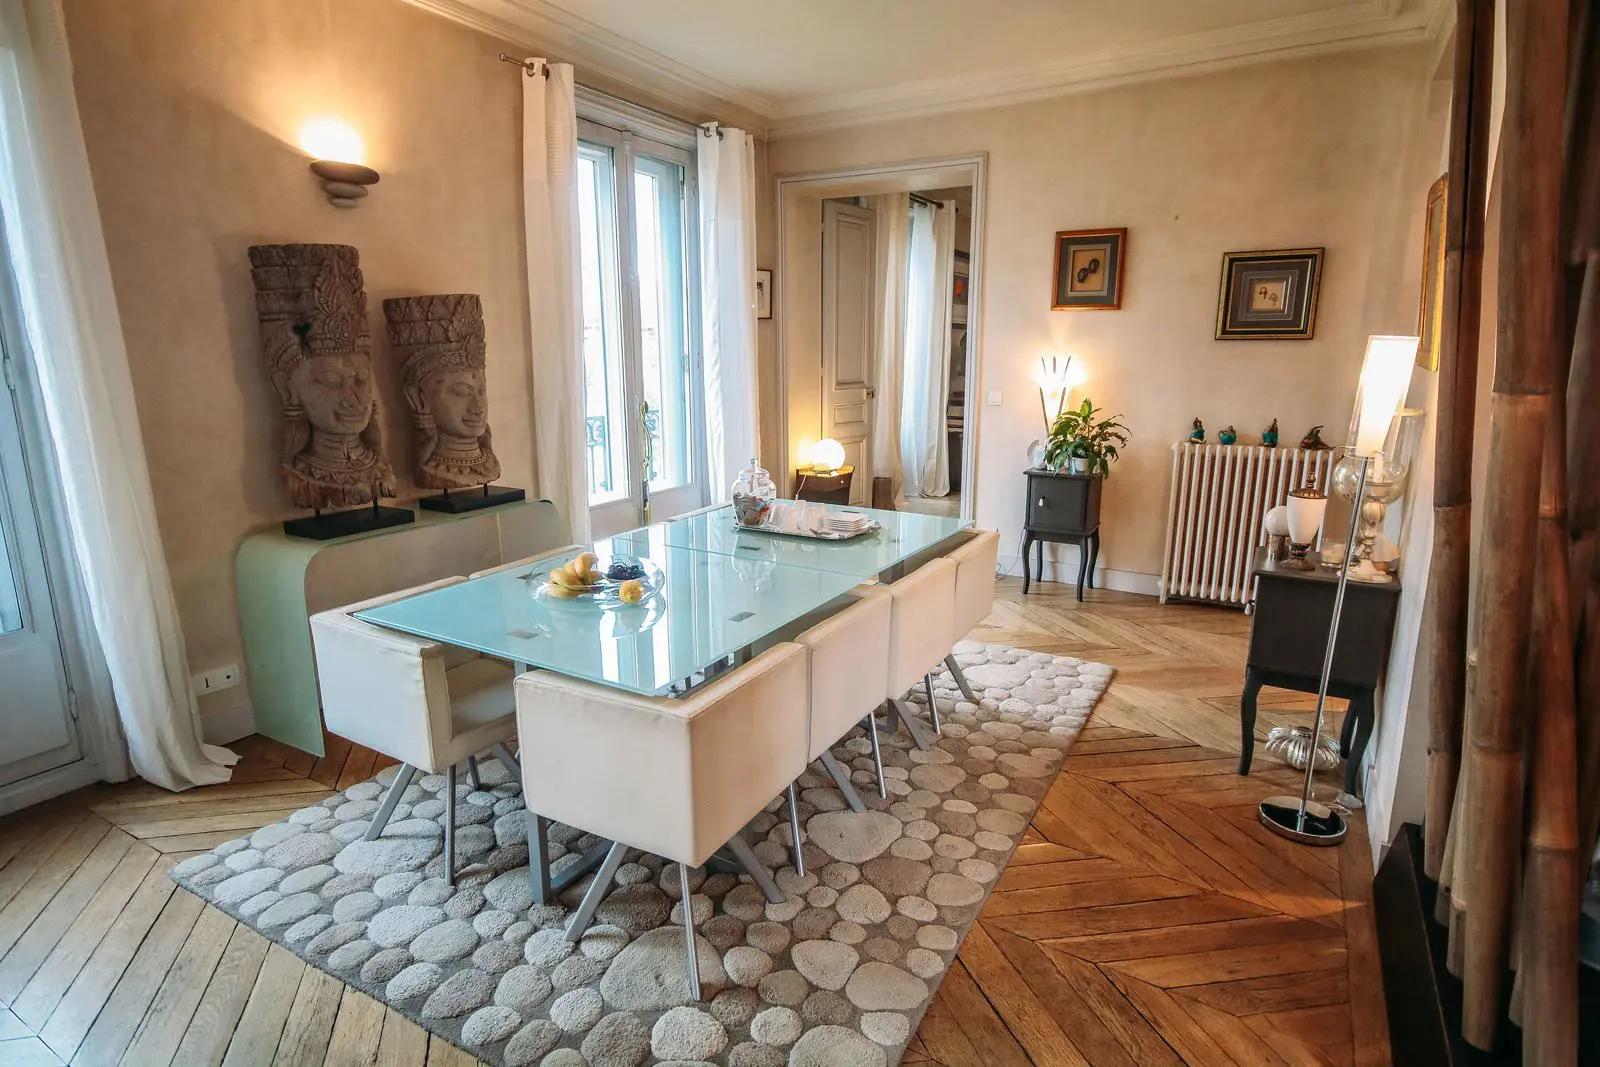 Bathroom in Beautiful Haussmann apartment with view of St-Augustin - 1